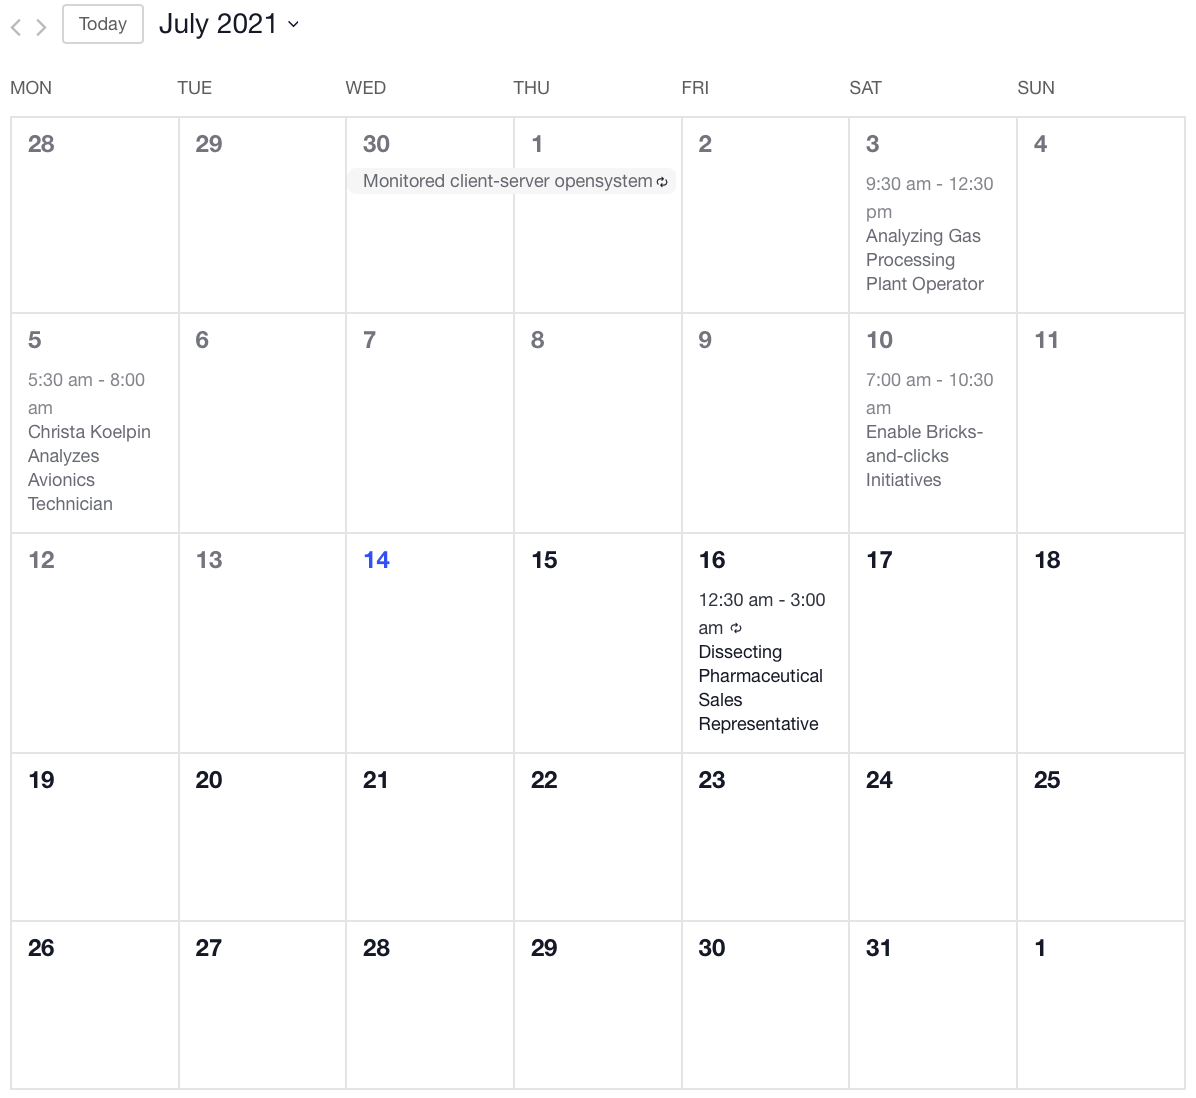 The Events Calendar in Month view for July 2021 showing five upcoming events.